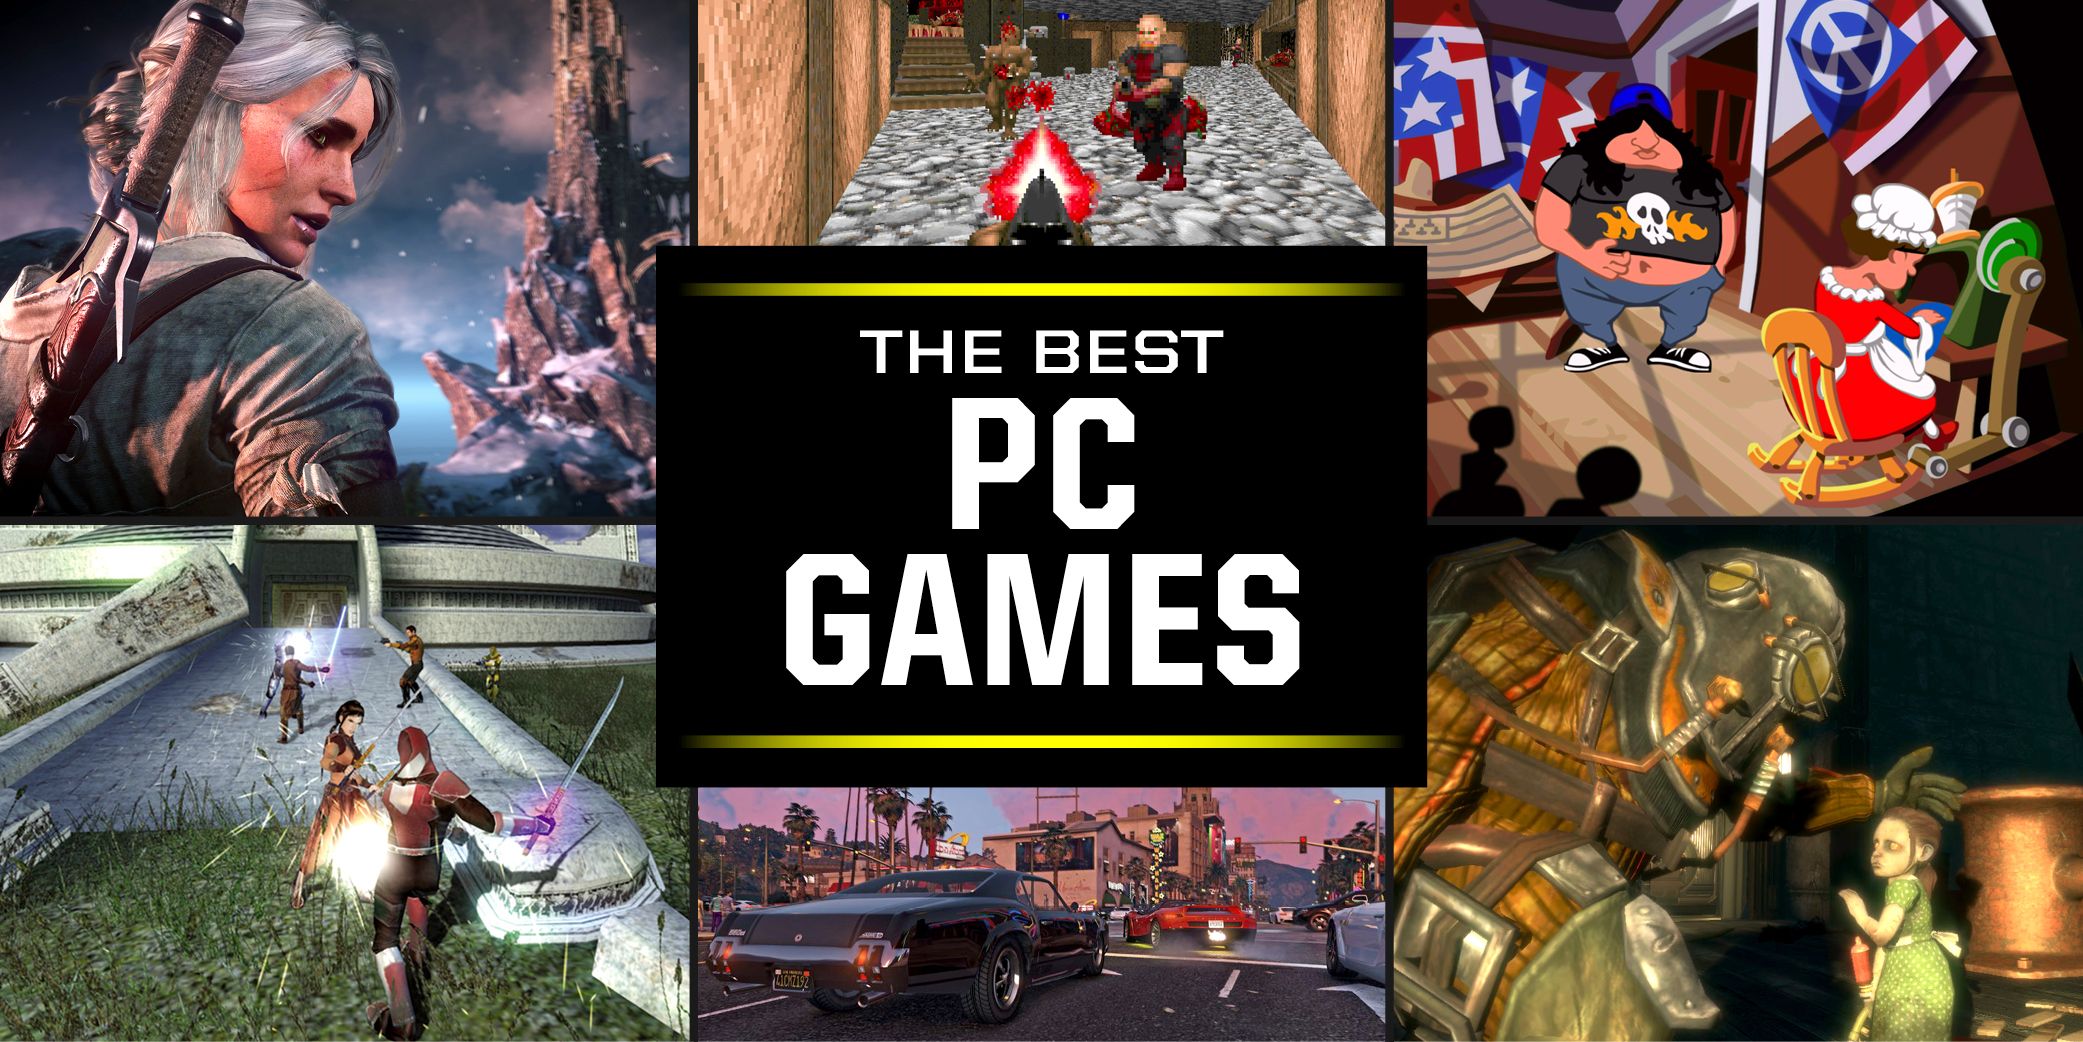 50 of the best PC games around - essential pick-ups from every